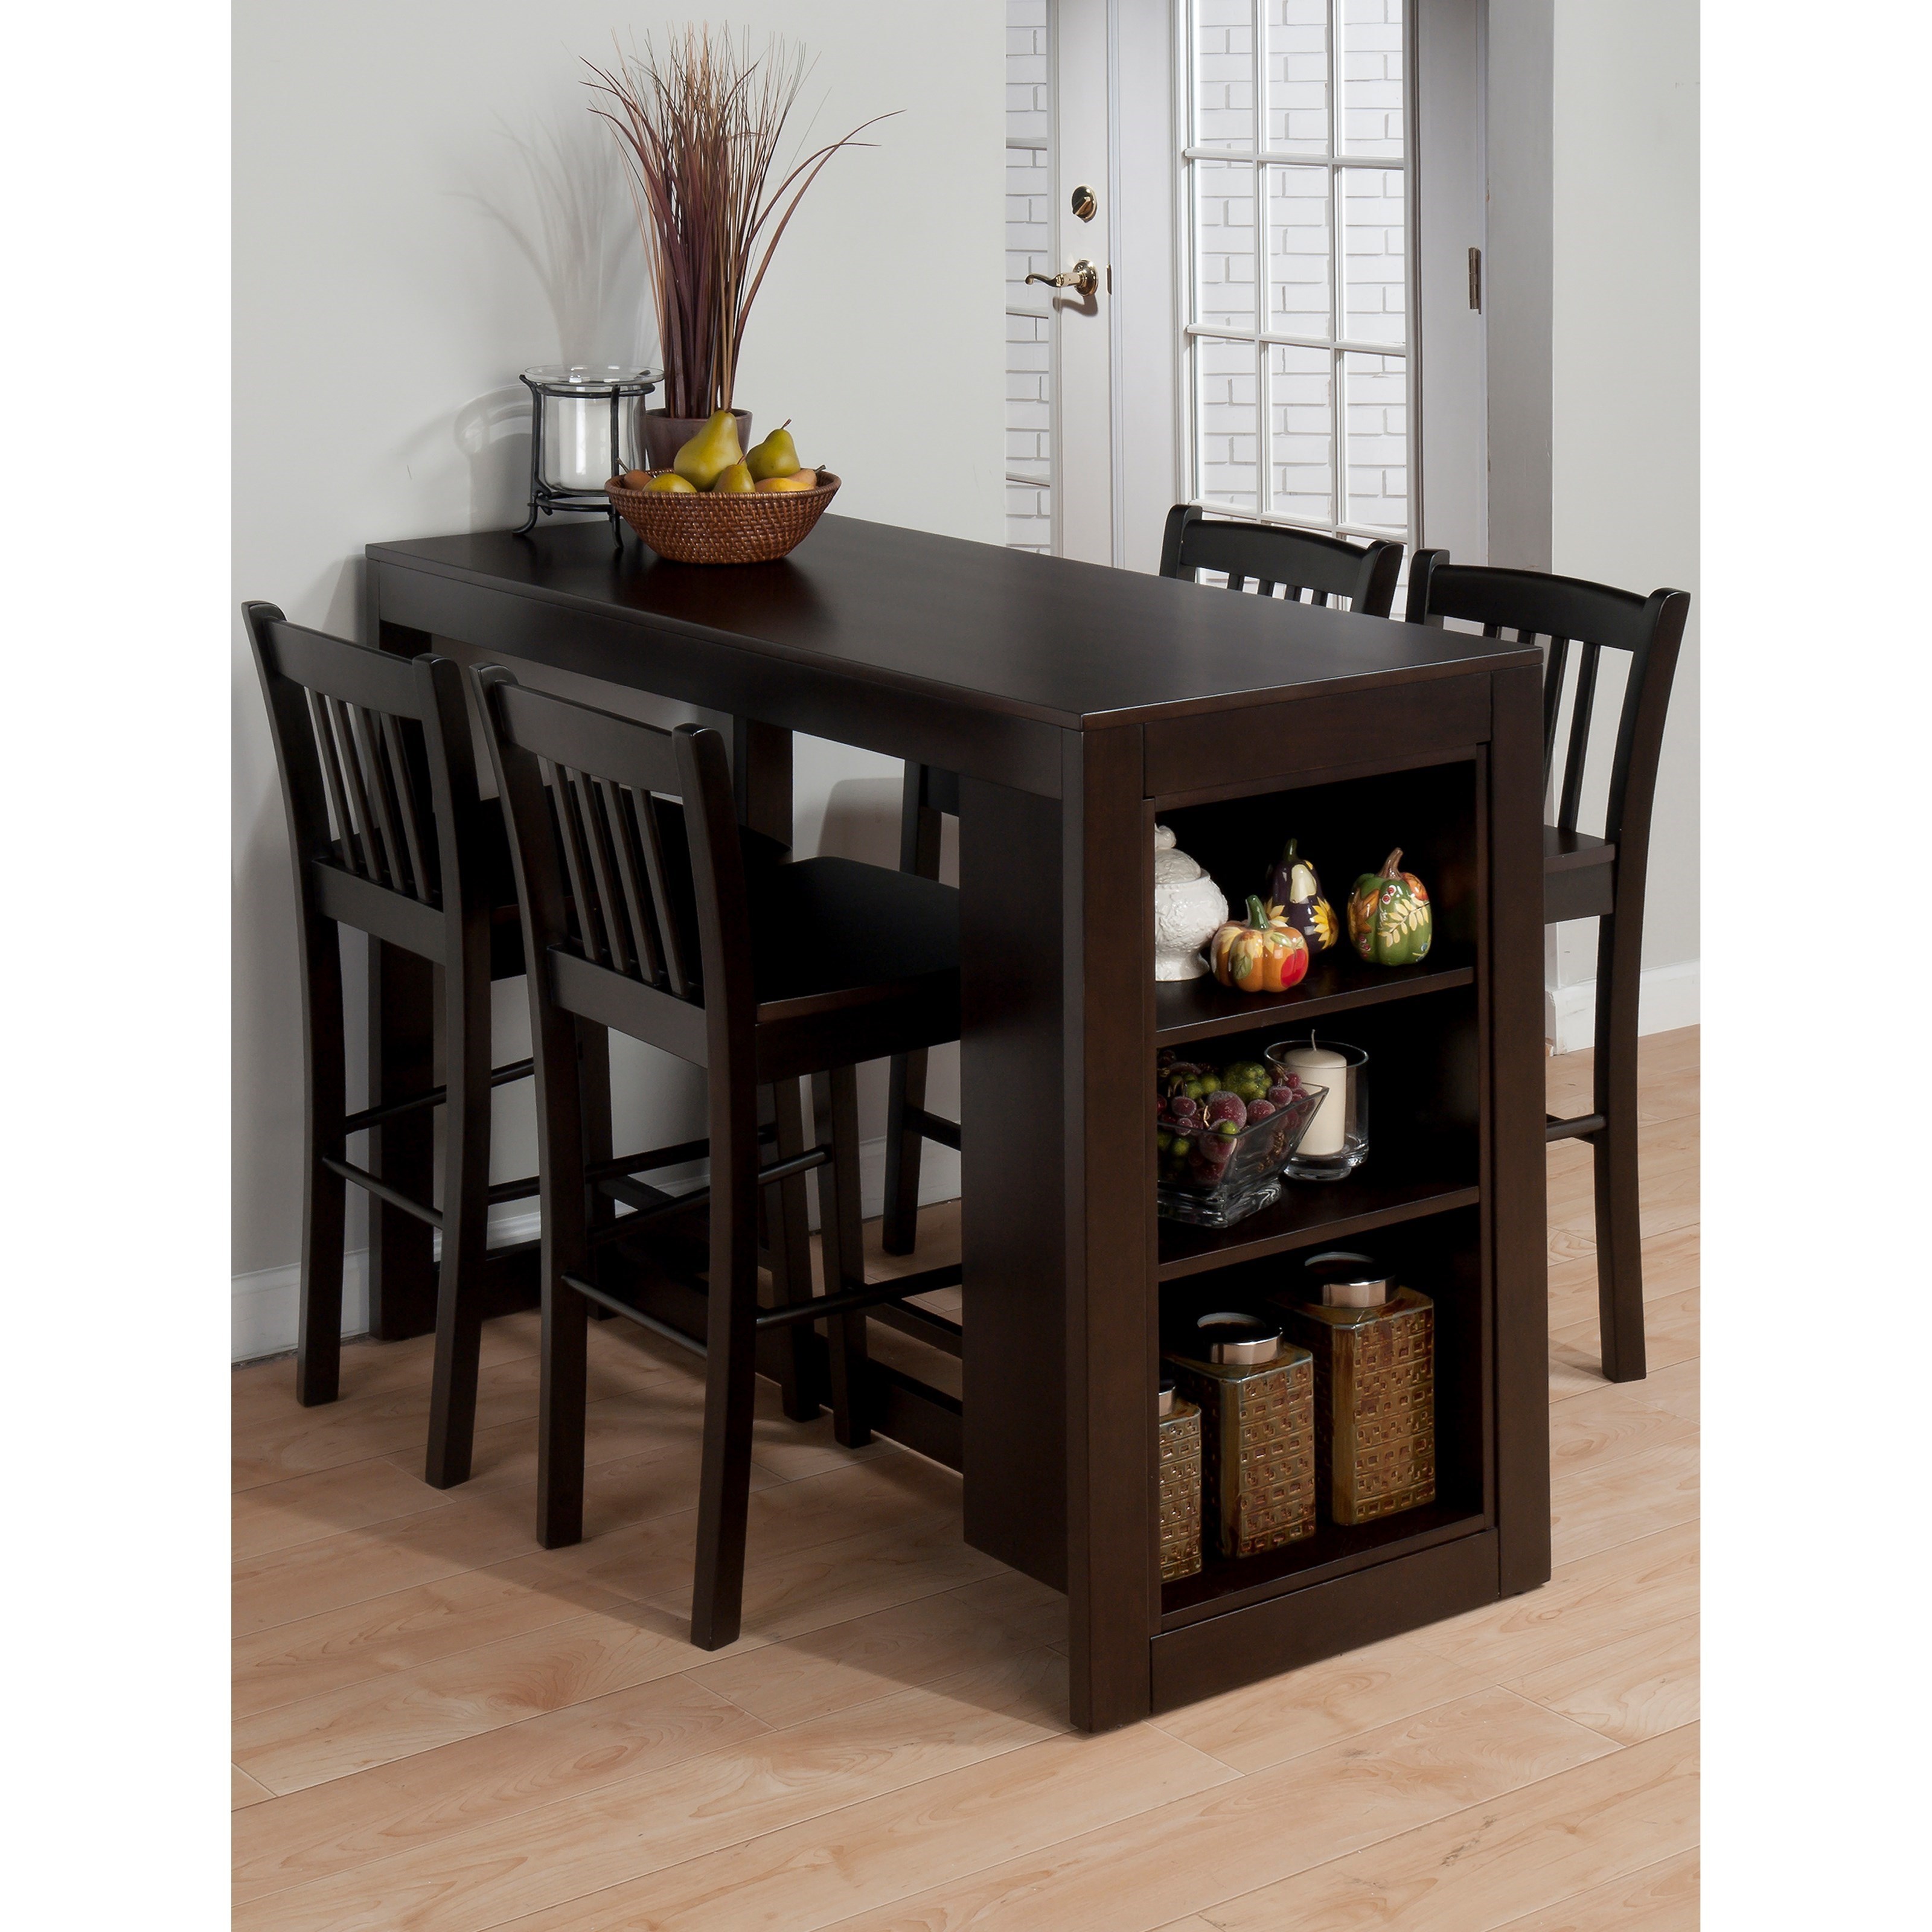 Jofran Tribeca Counter Height Table with 4 Chairs - Jofran